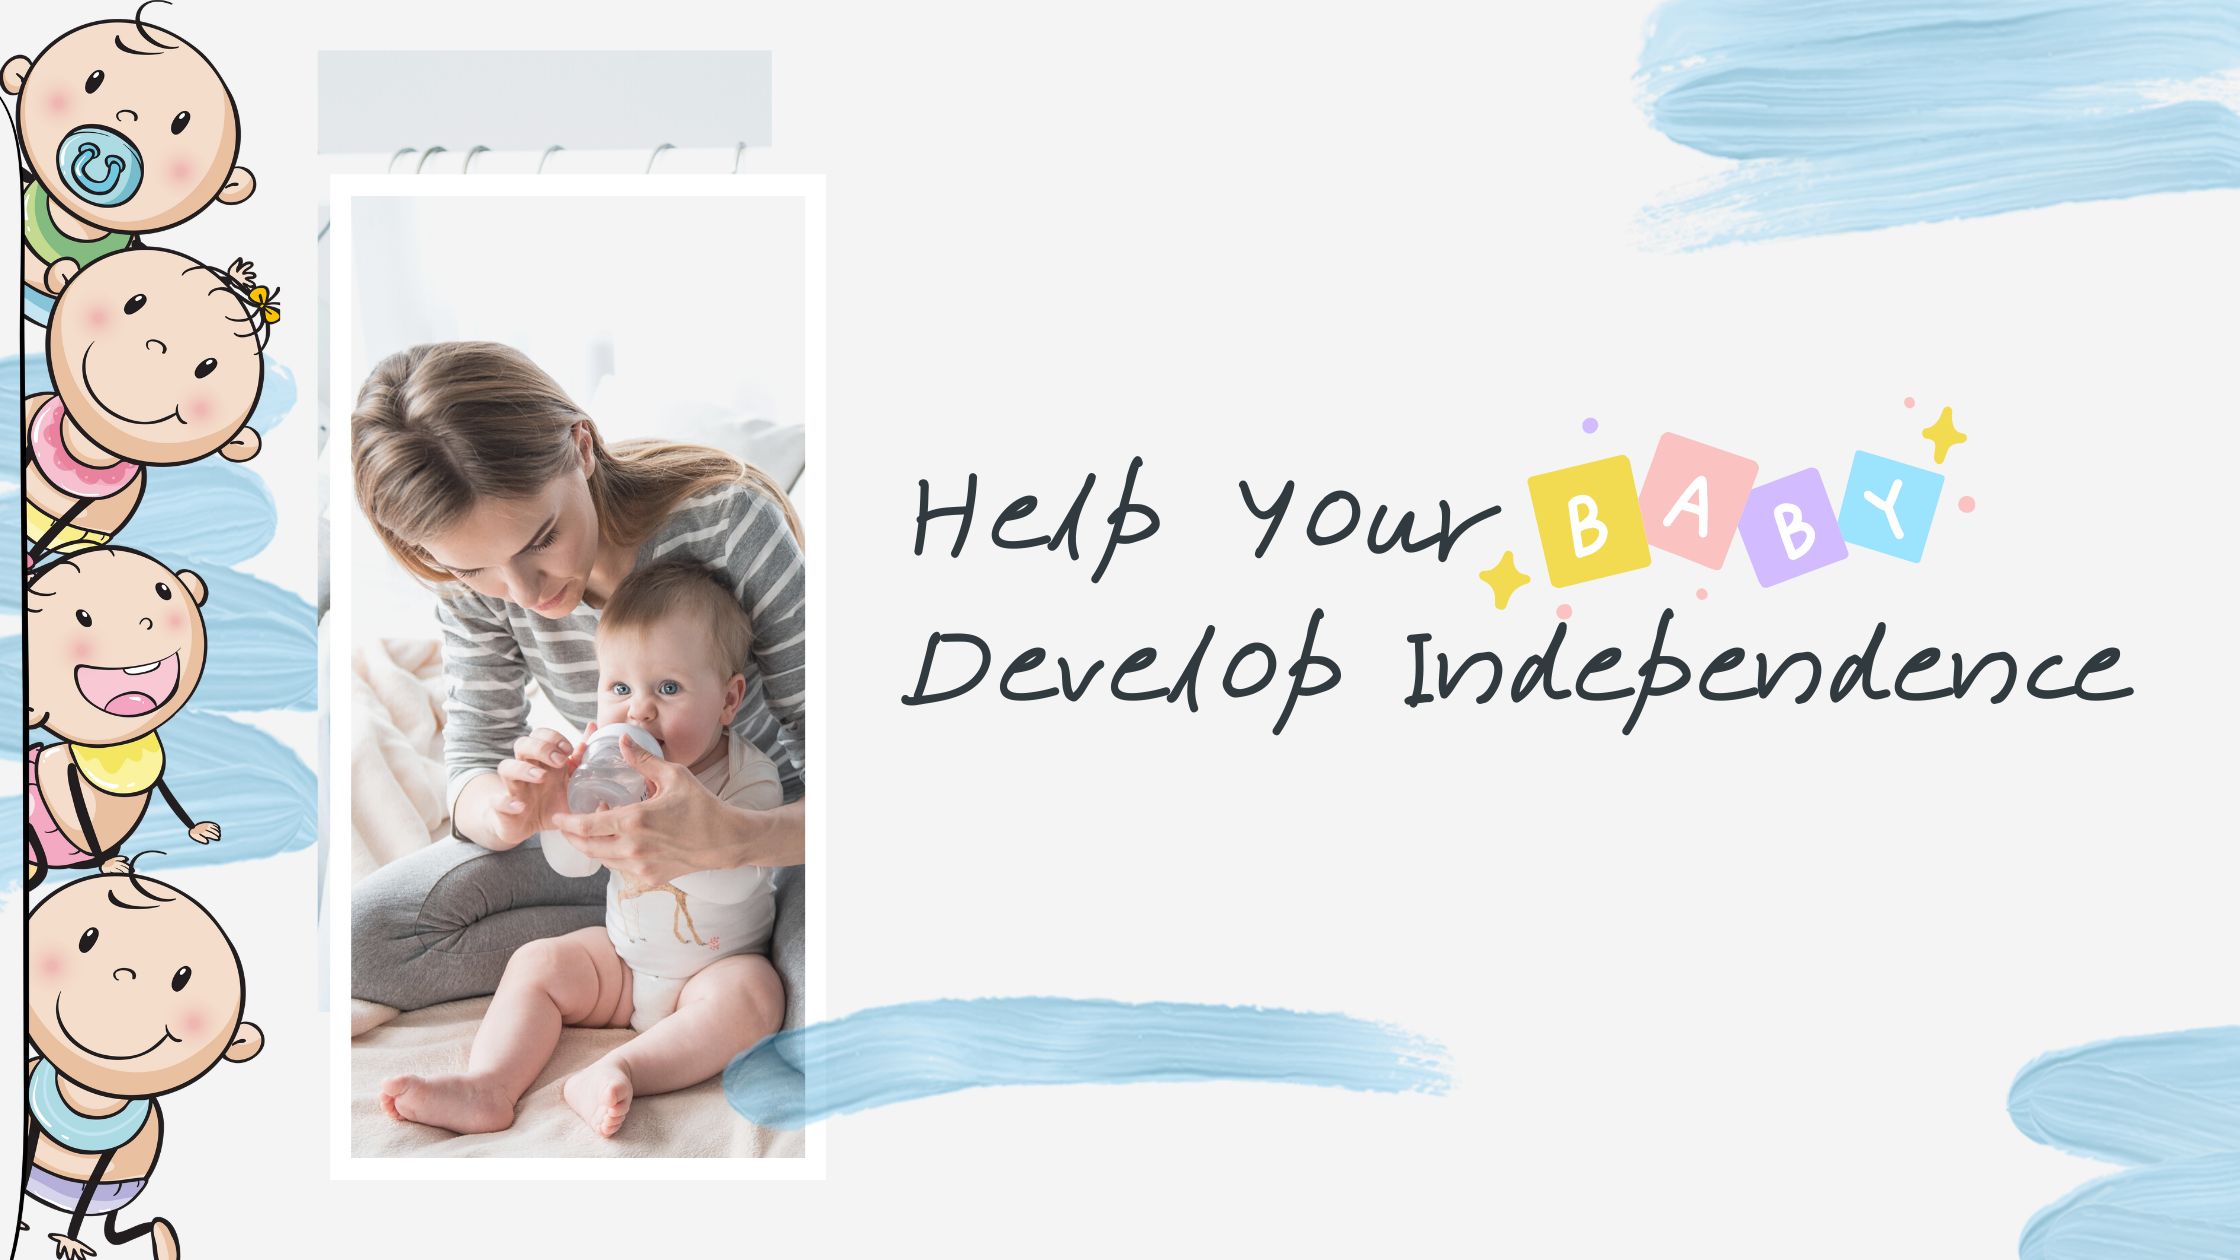 Help Your Baby Develop Independence